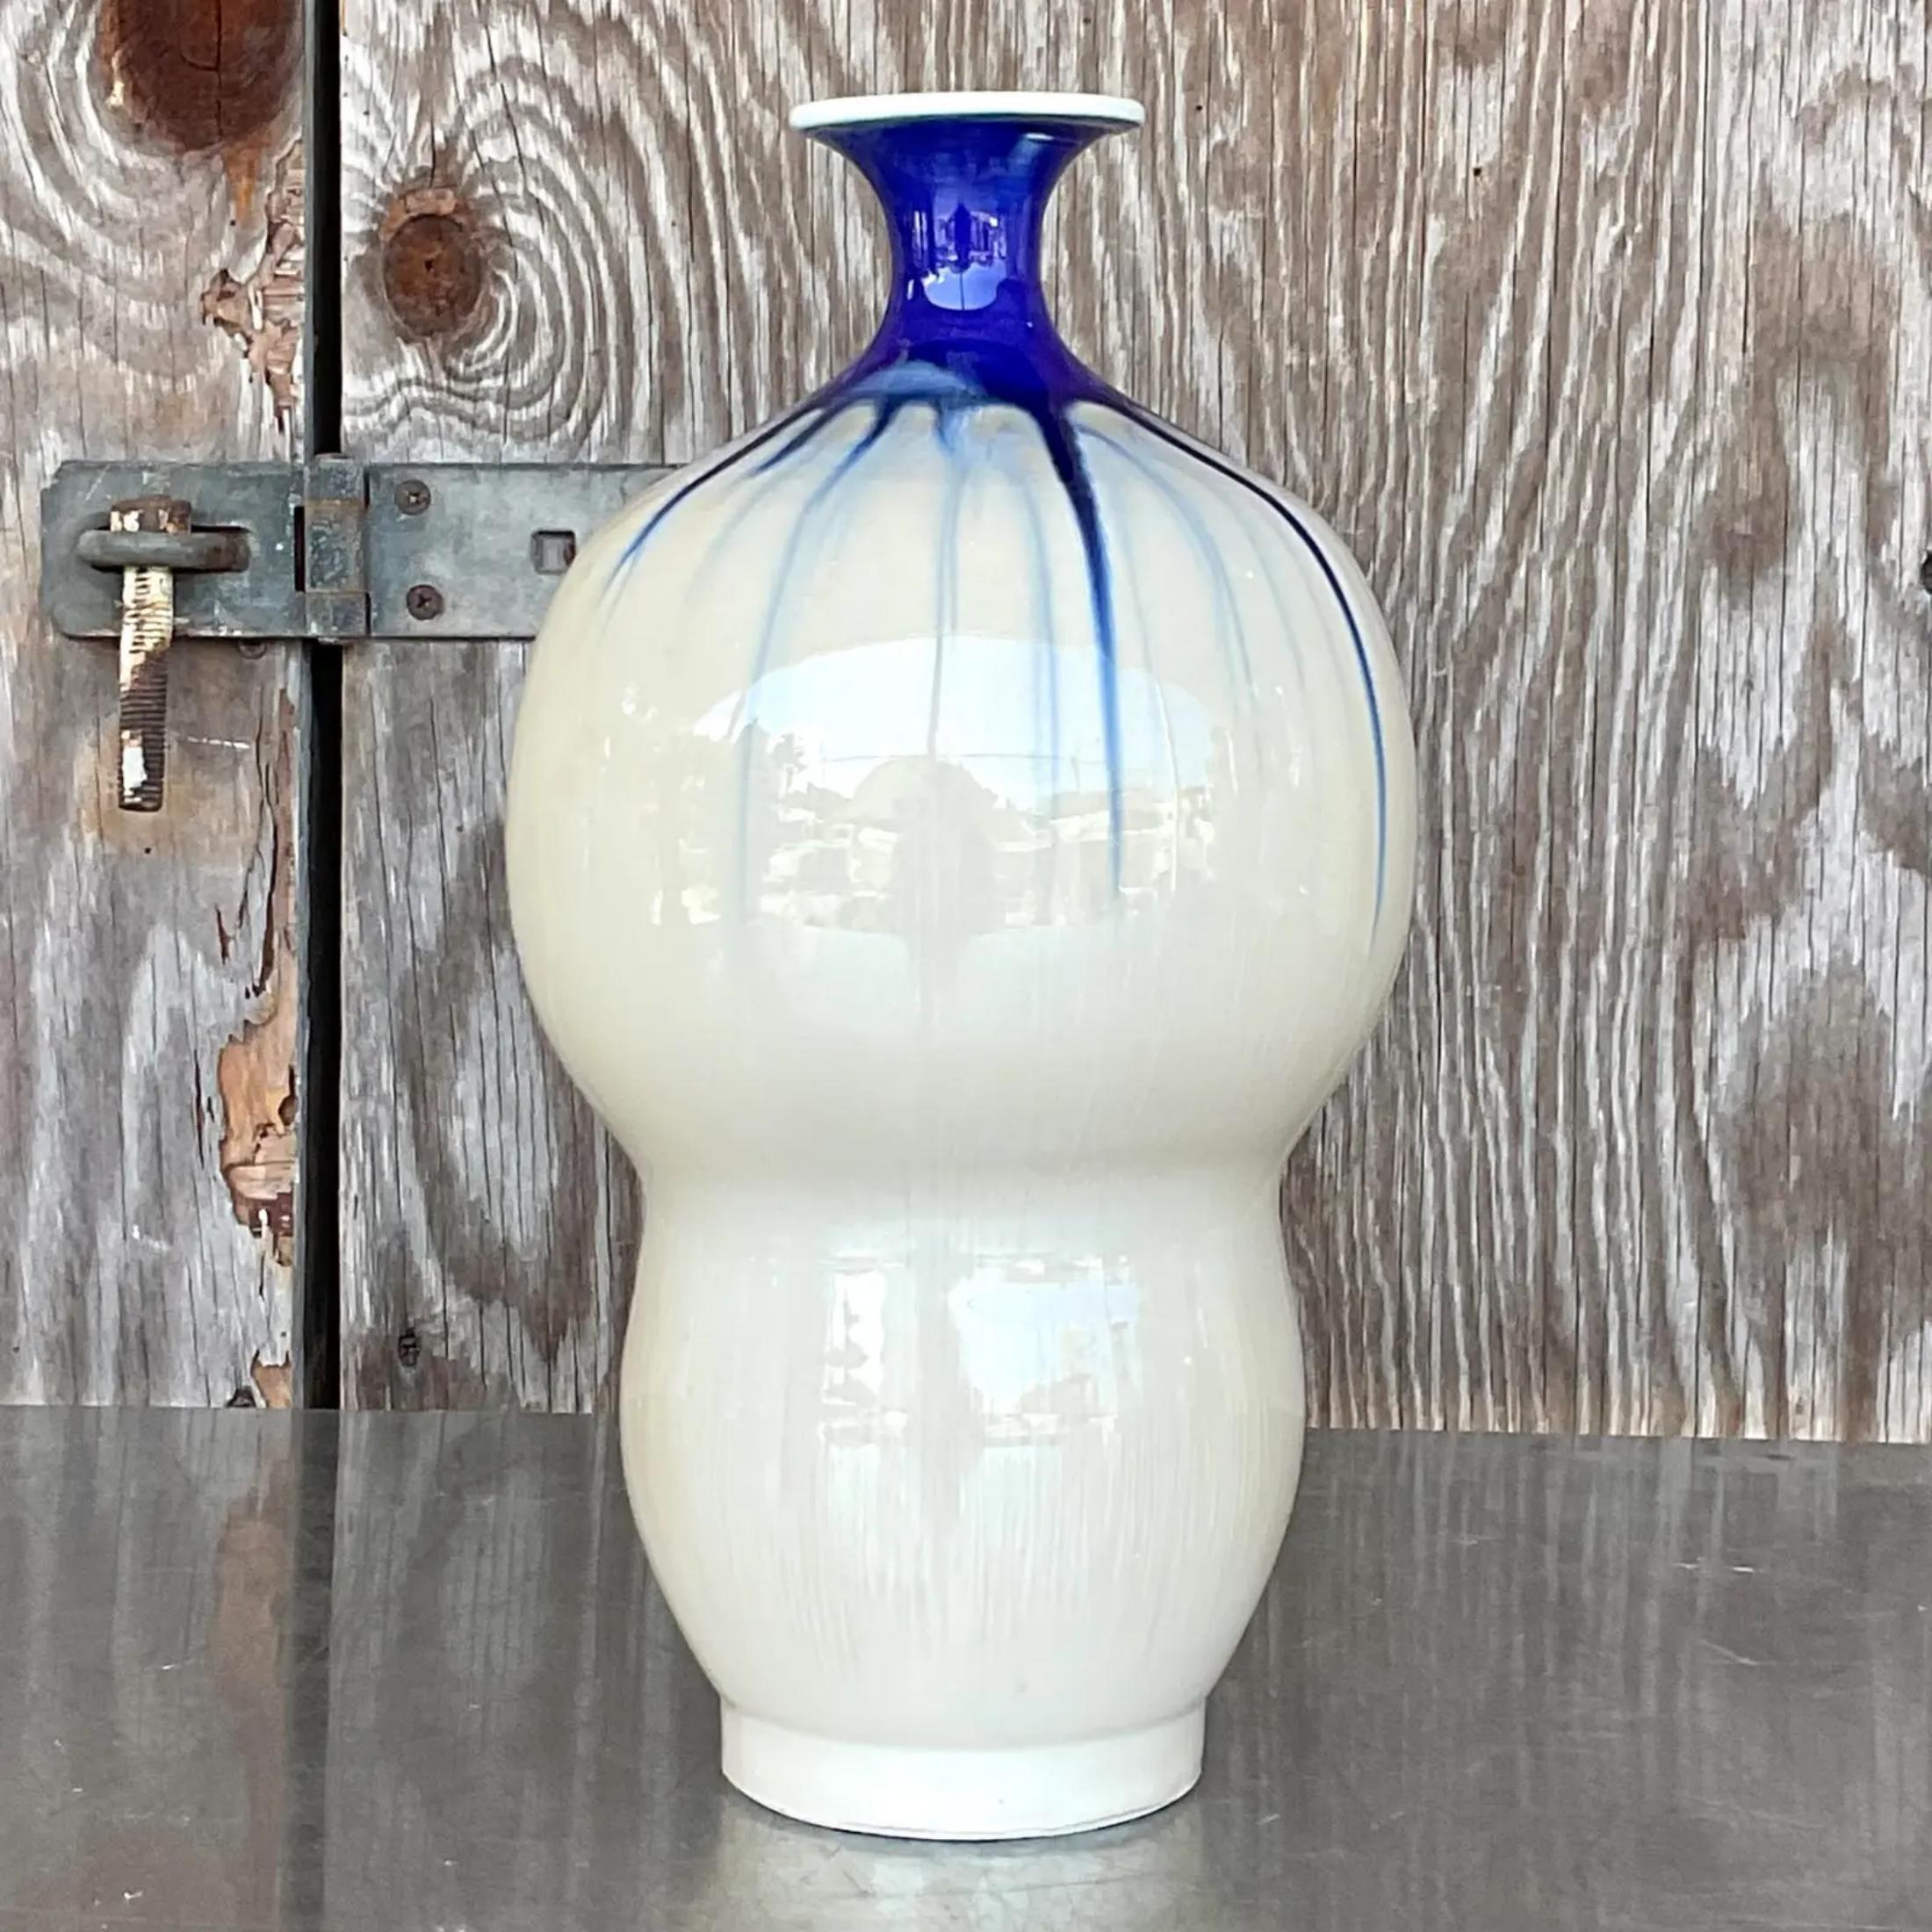 A fabulous vintage Asian vase. A chic little gourd lamp with a contemporary blue and white glaze. A great way to add a little flash of modernity to Thr any blue and white collection. Acquired from a Palm Beach estate